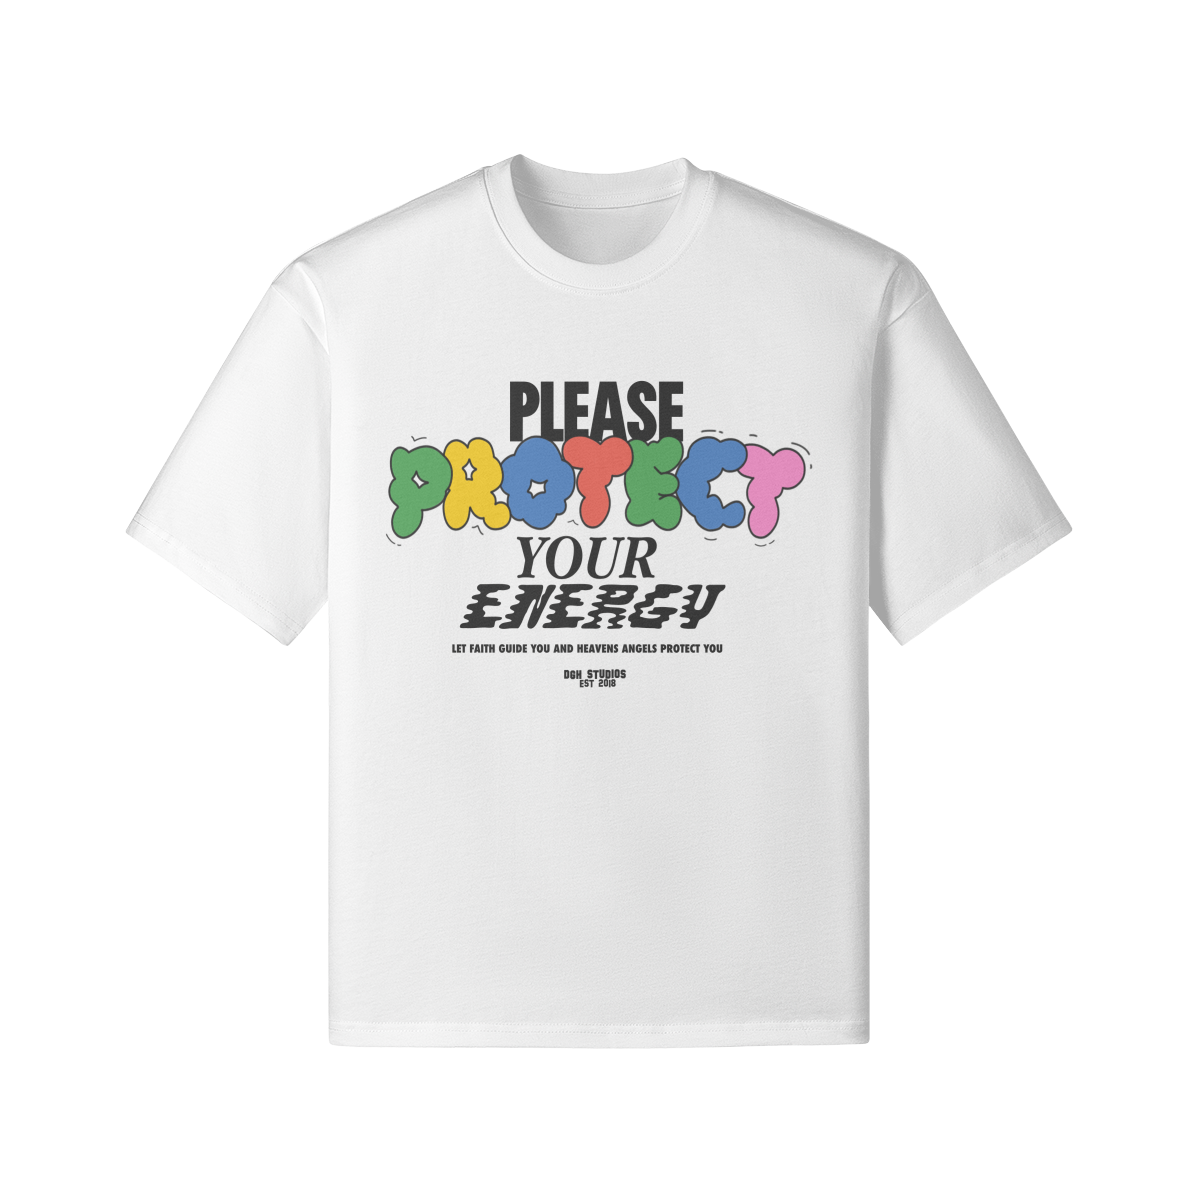 Protect Your Energy T-Shirt by DGH STUDIOS